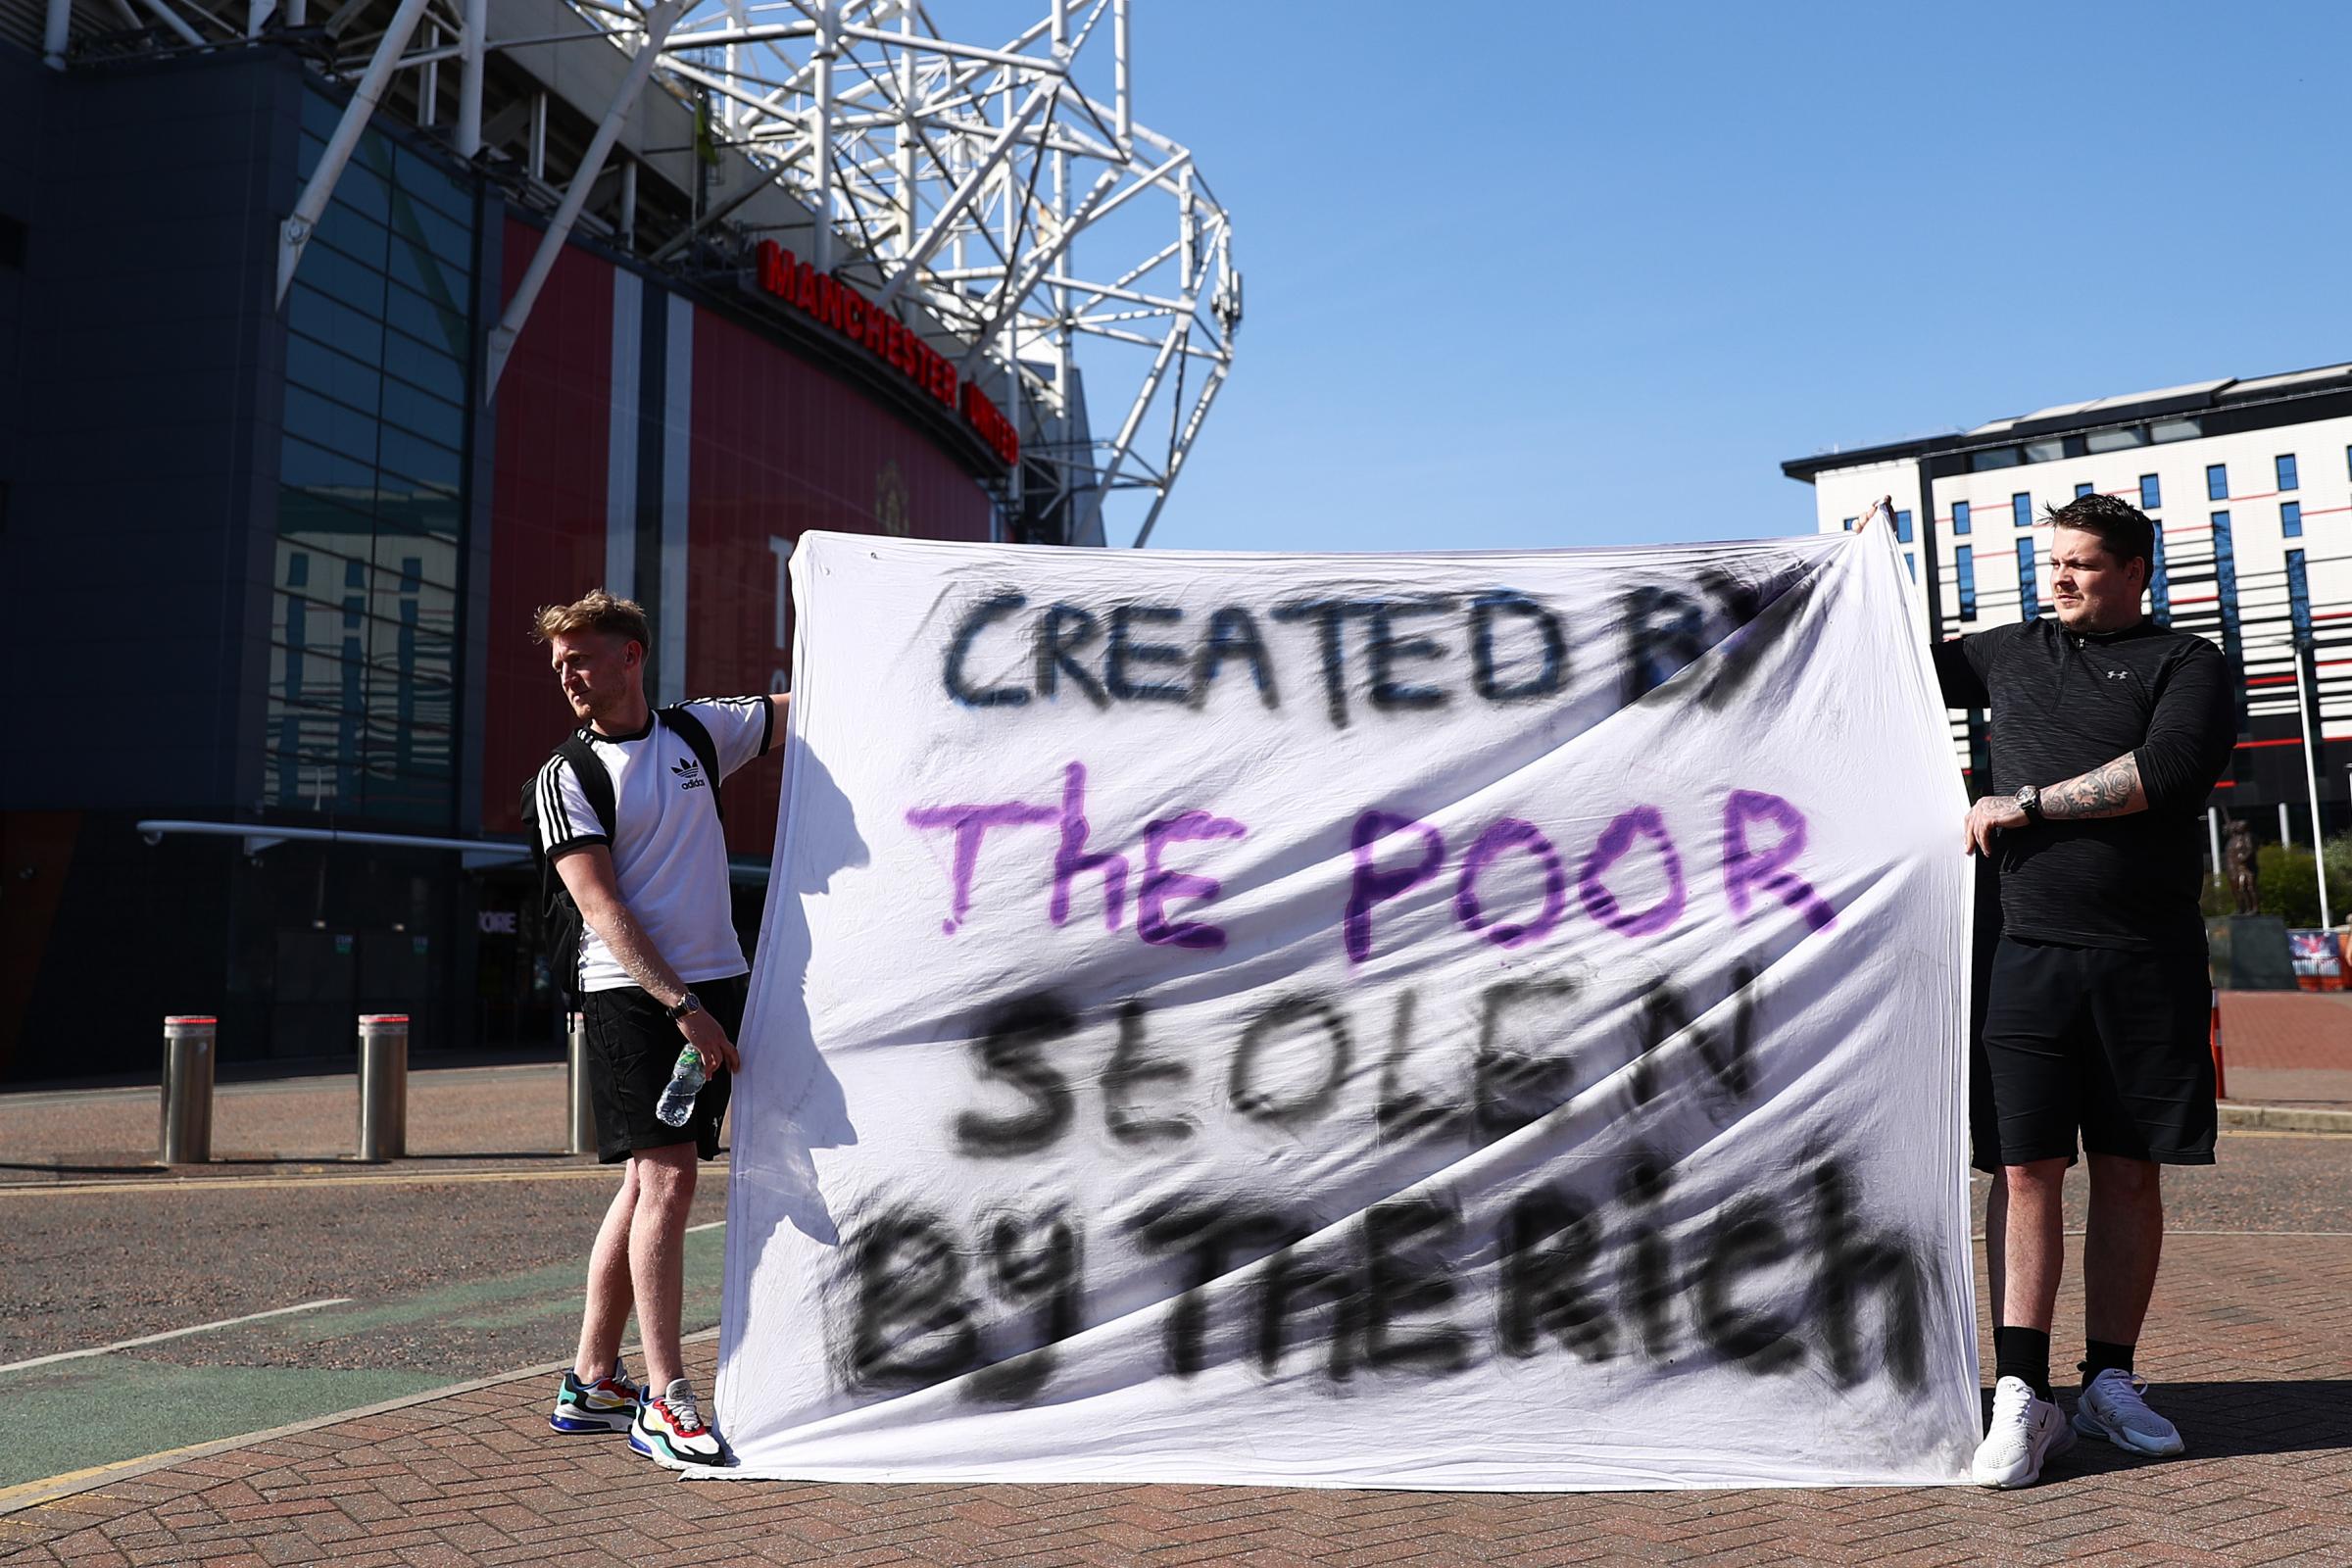 A banner which reads Created by the Poor. Stolen by the Rich outside Manchester Uniteds home ground. Credit: PA